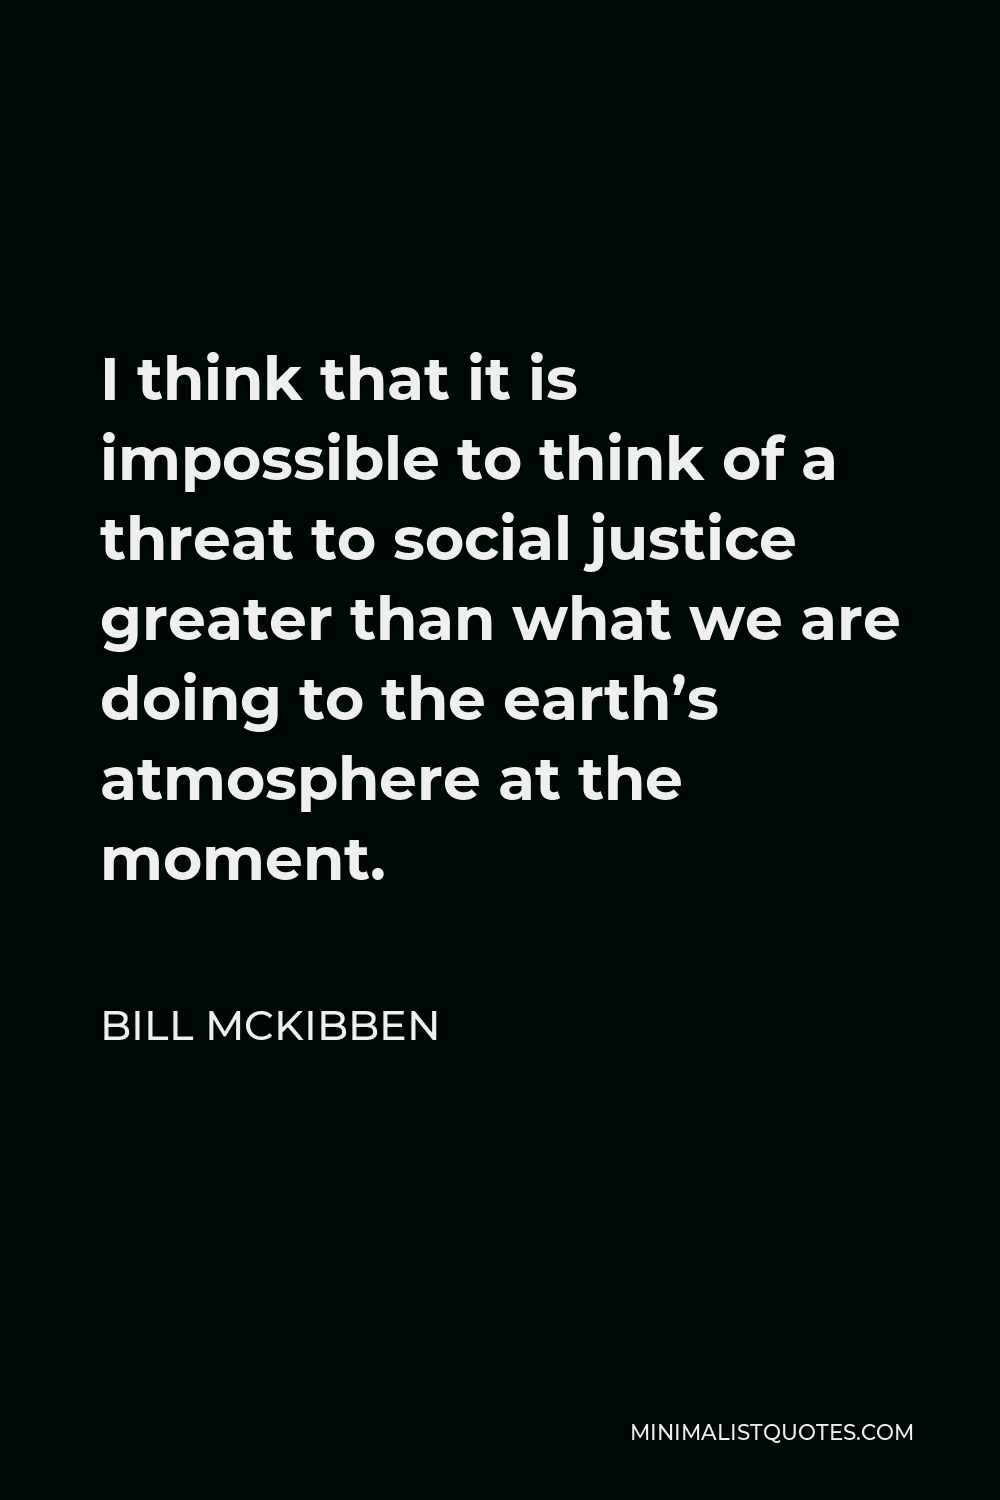 Bill McKibben Quote - I think that it is impossible to think of a threat to social justice greater than what we are doing to the earth’s atmosphere at the moment.